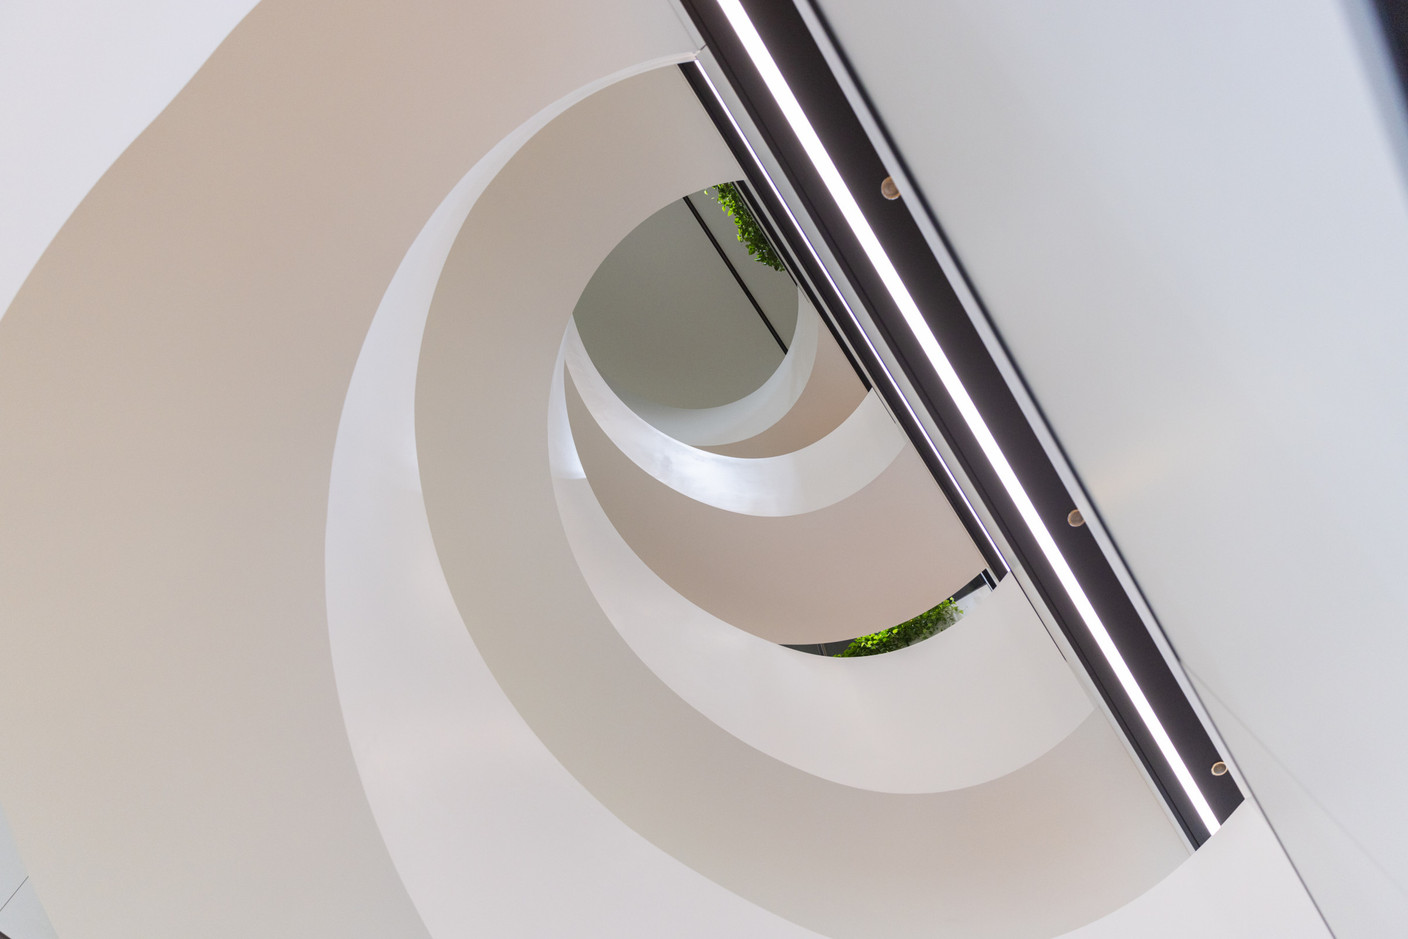 The elliptical staircase inspired the name of the building. Photo: Romain Gamba/Maison Moderne